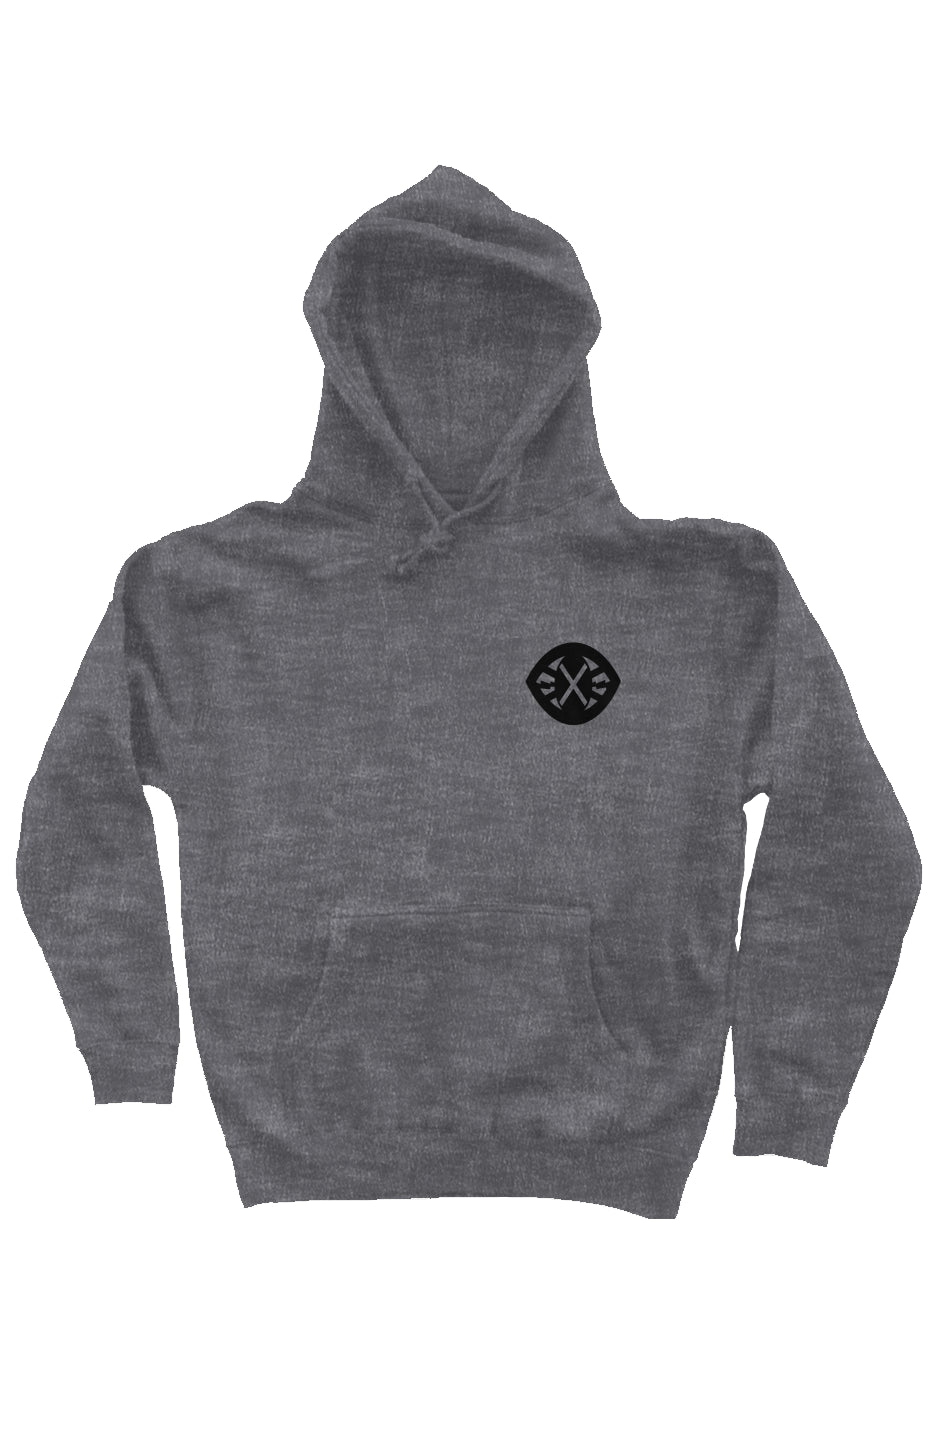 The Invisible Panchos Mother Hoody- Black/Grey